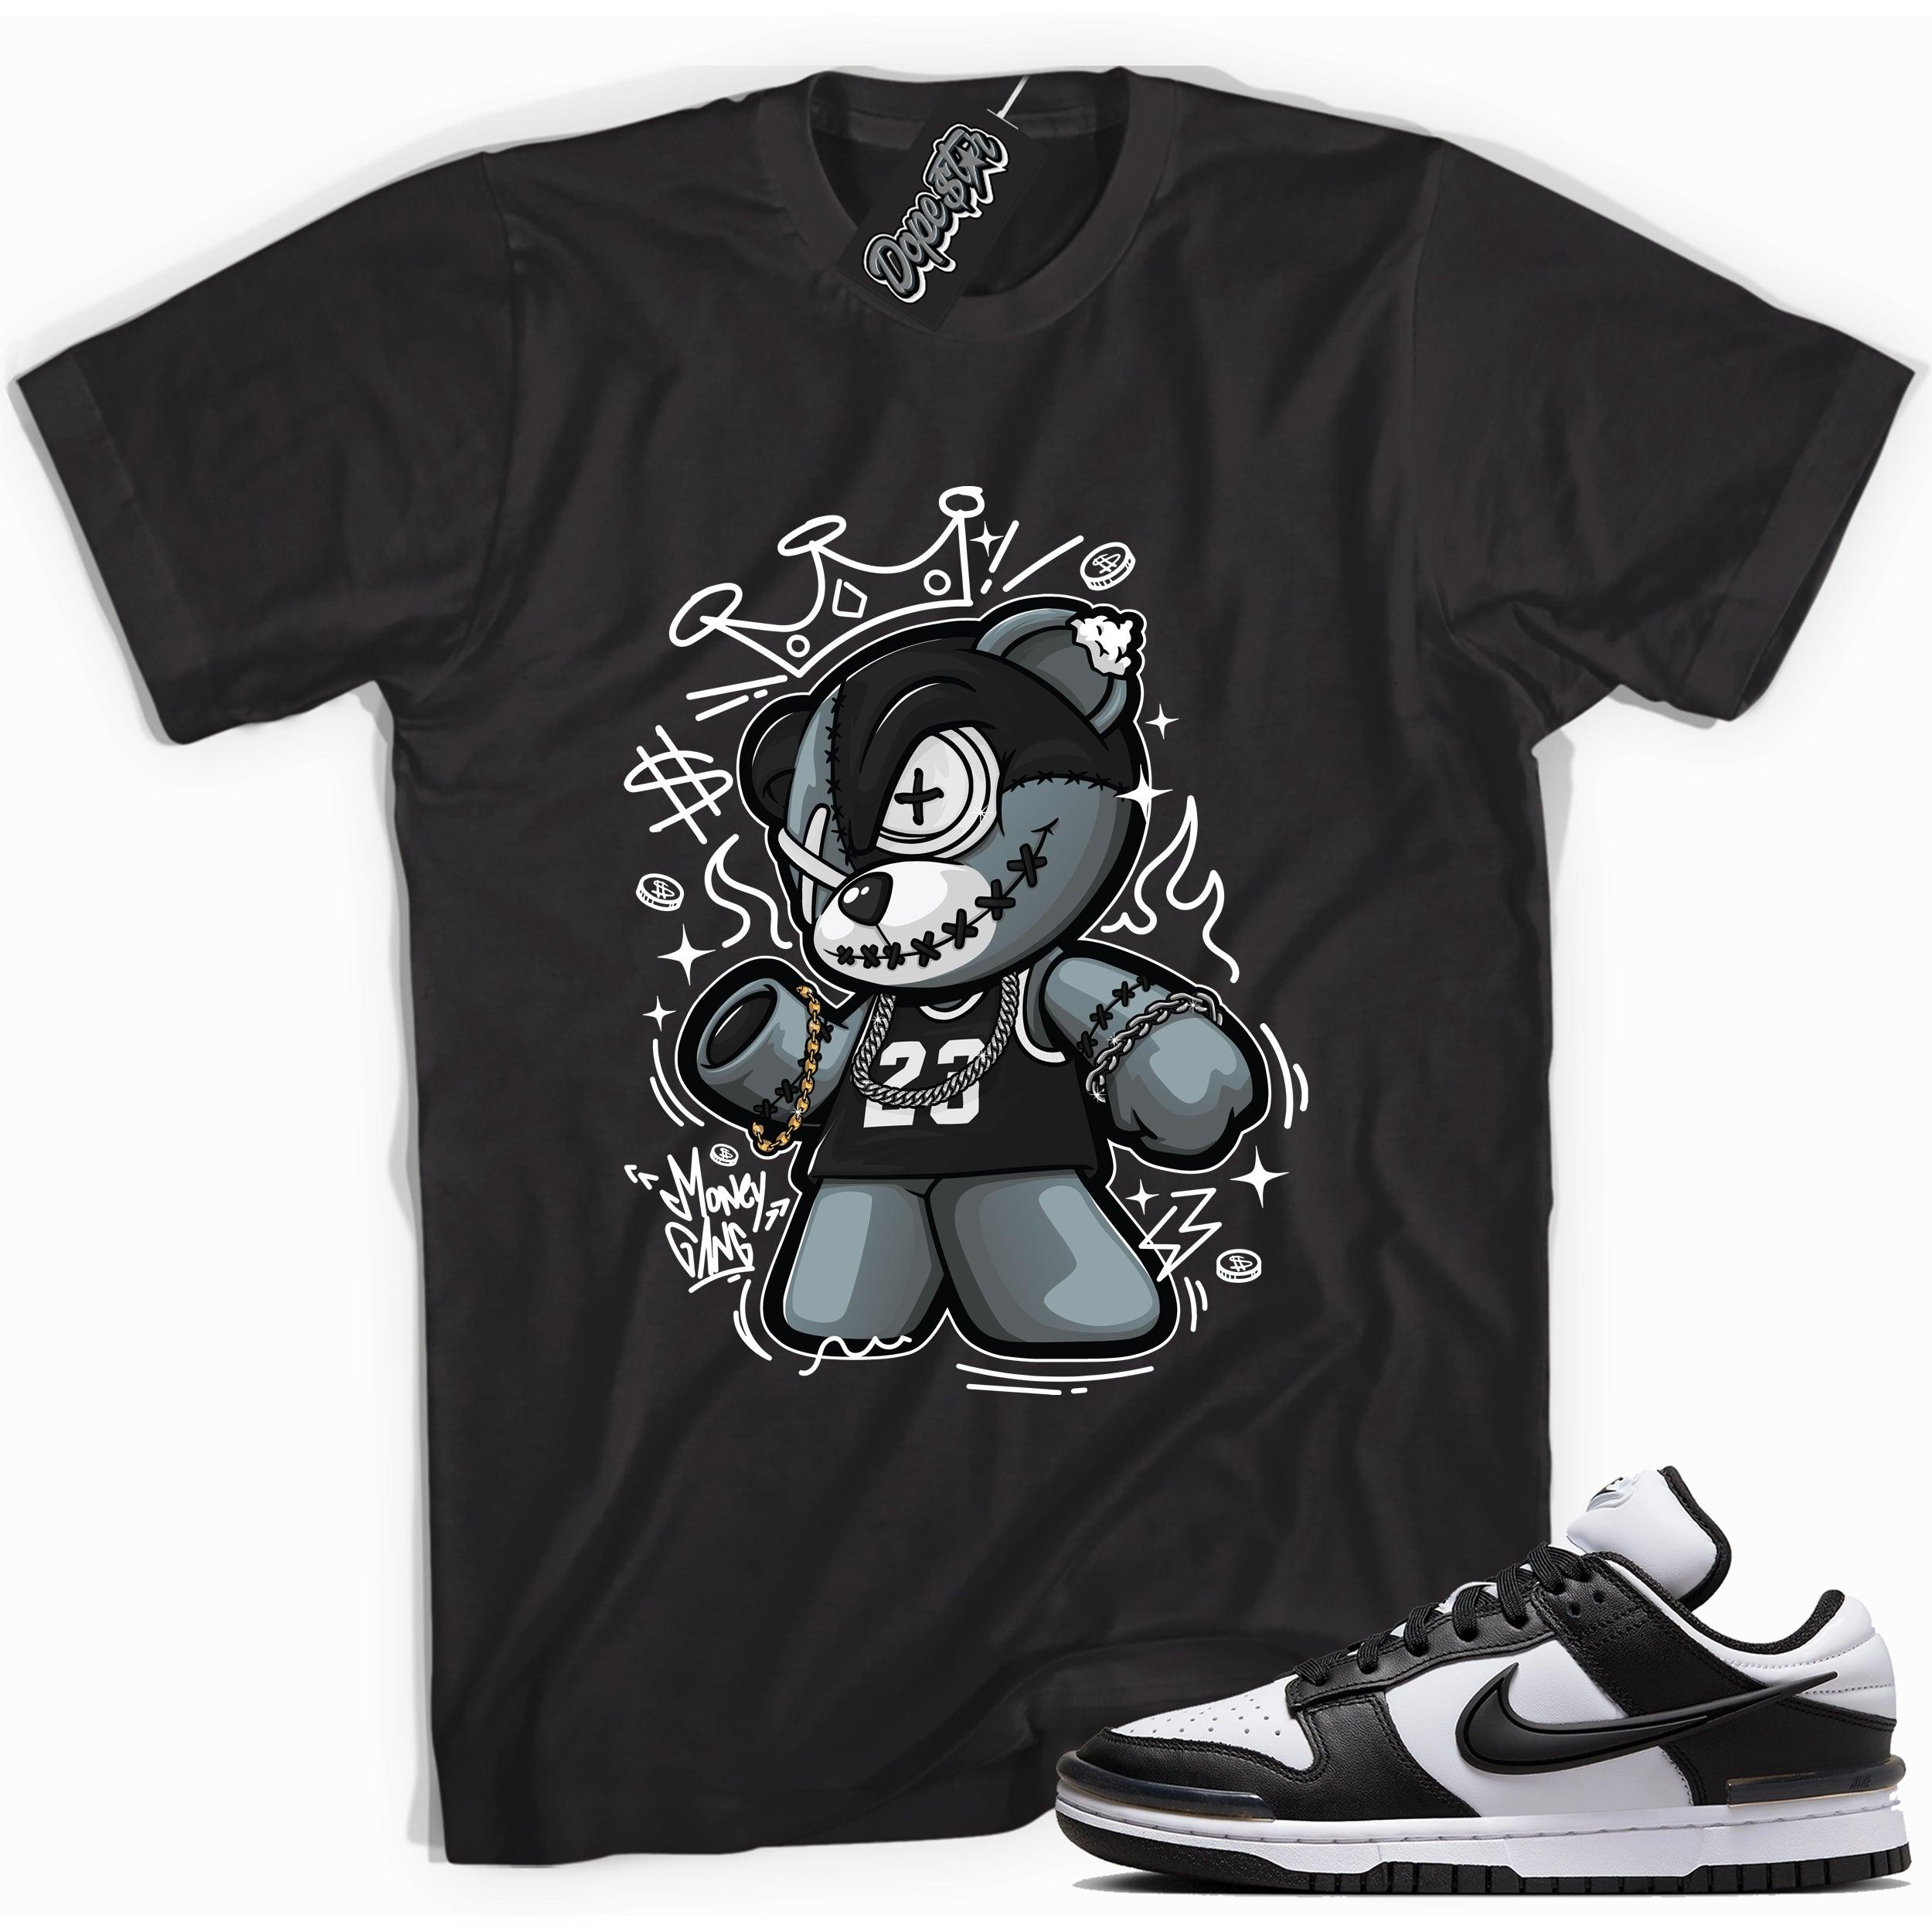 Cool black graphic tee with 'money gang bear' print, that perfectly matches Nike Dunk Low Twist Panda sneakers.